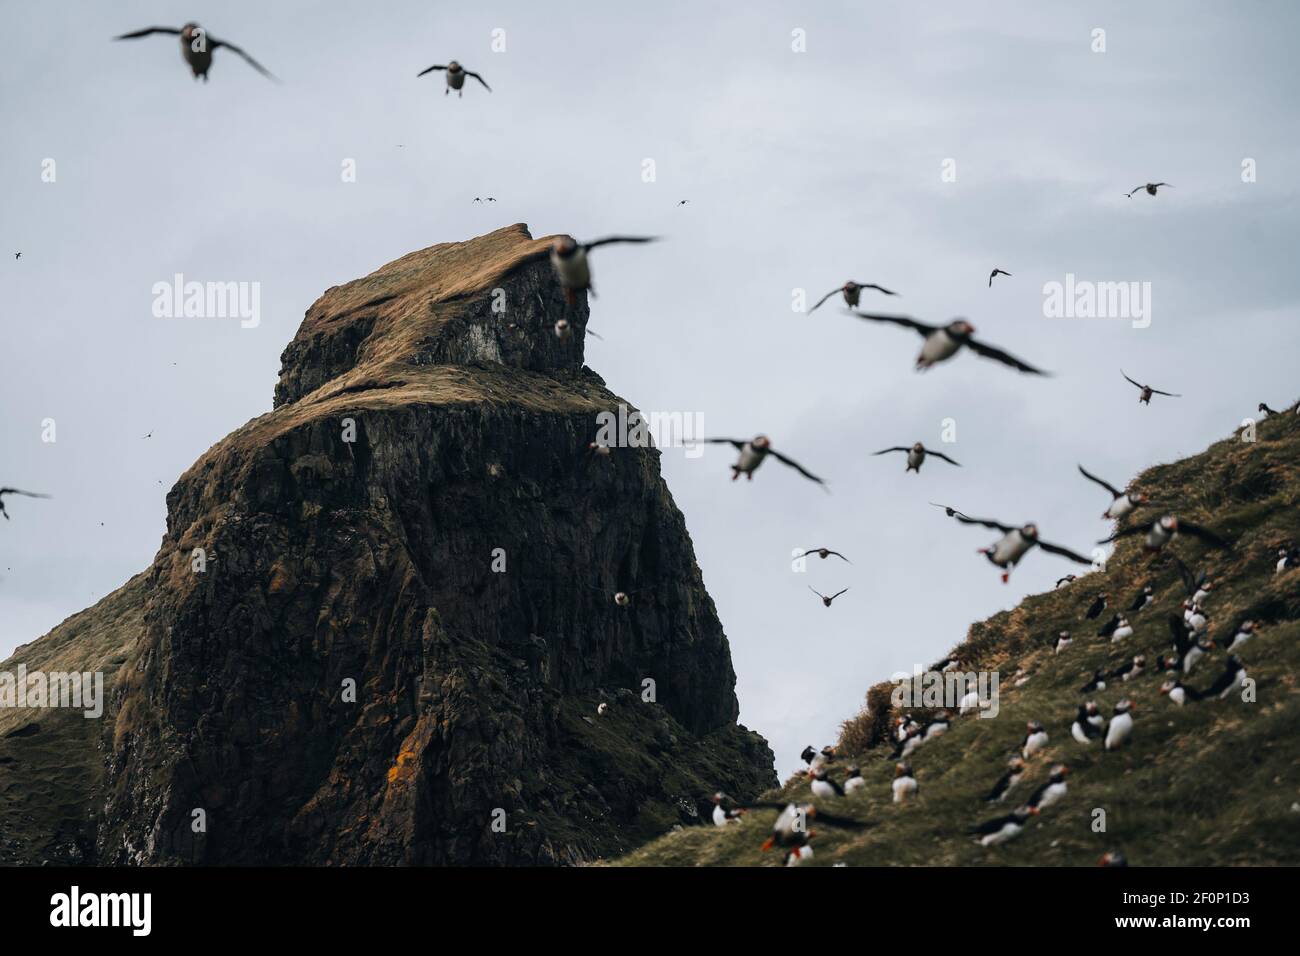 Puffins at the Mykines Island, part of the Faroe Islands in the North Atlantic ocean. Stock Photo